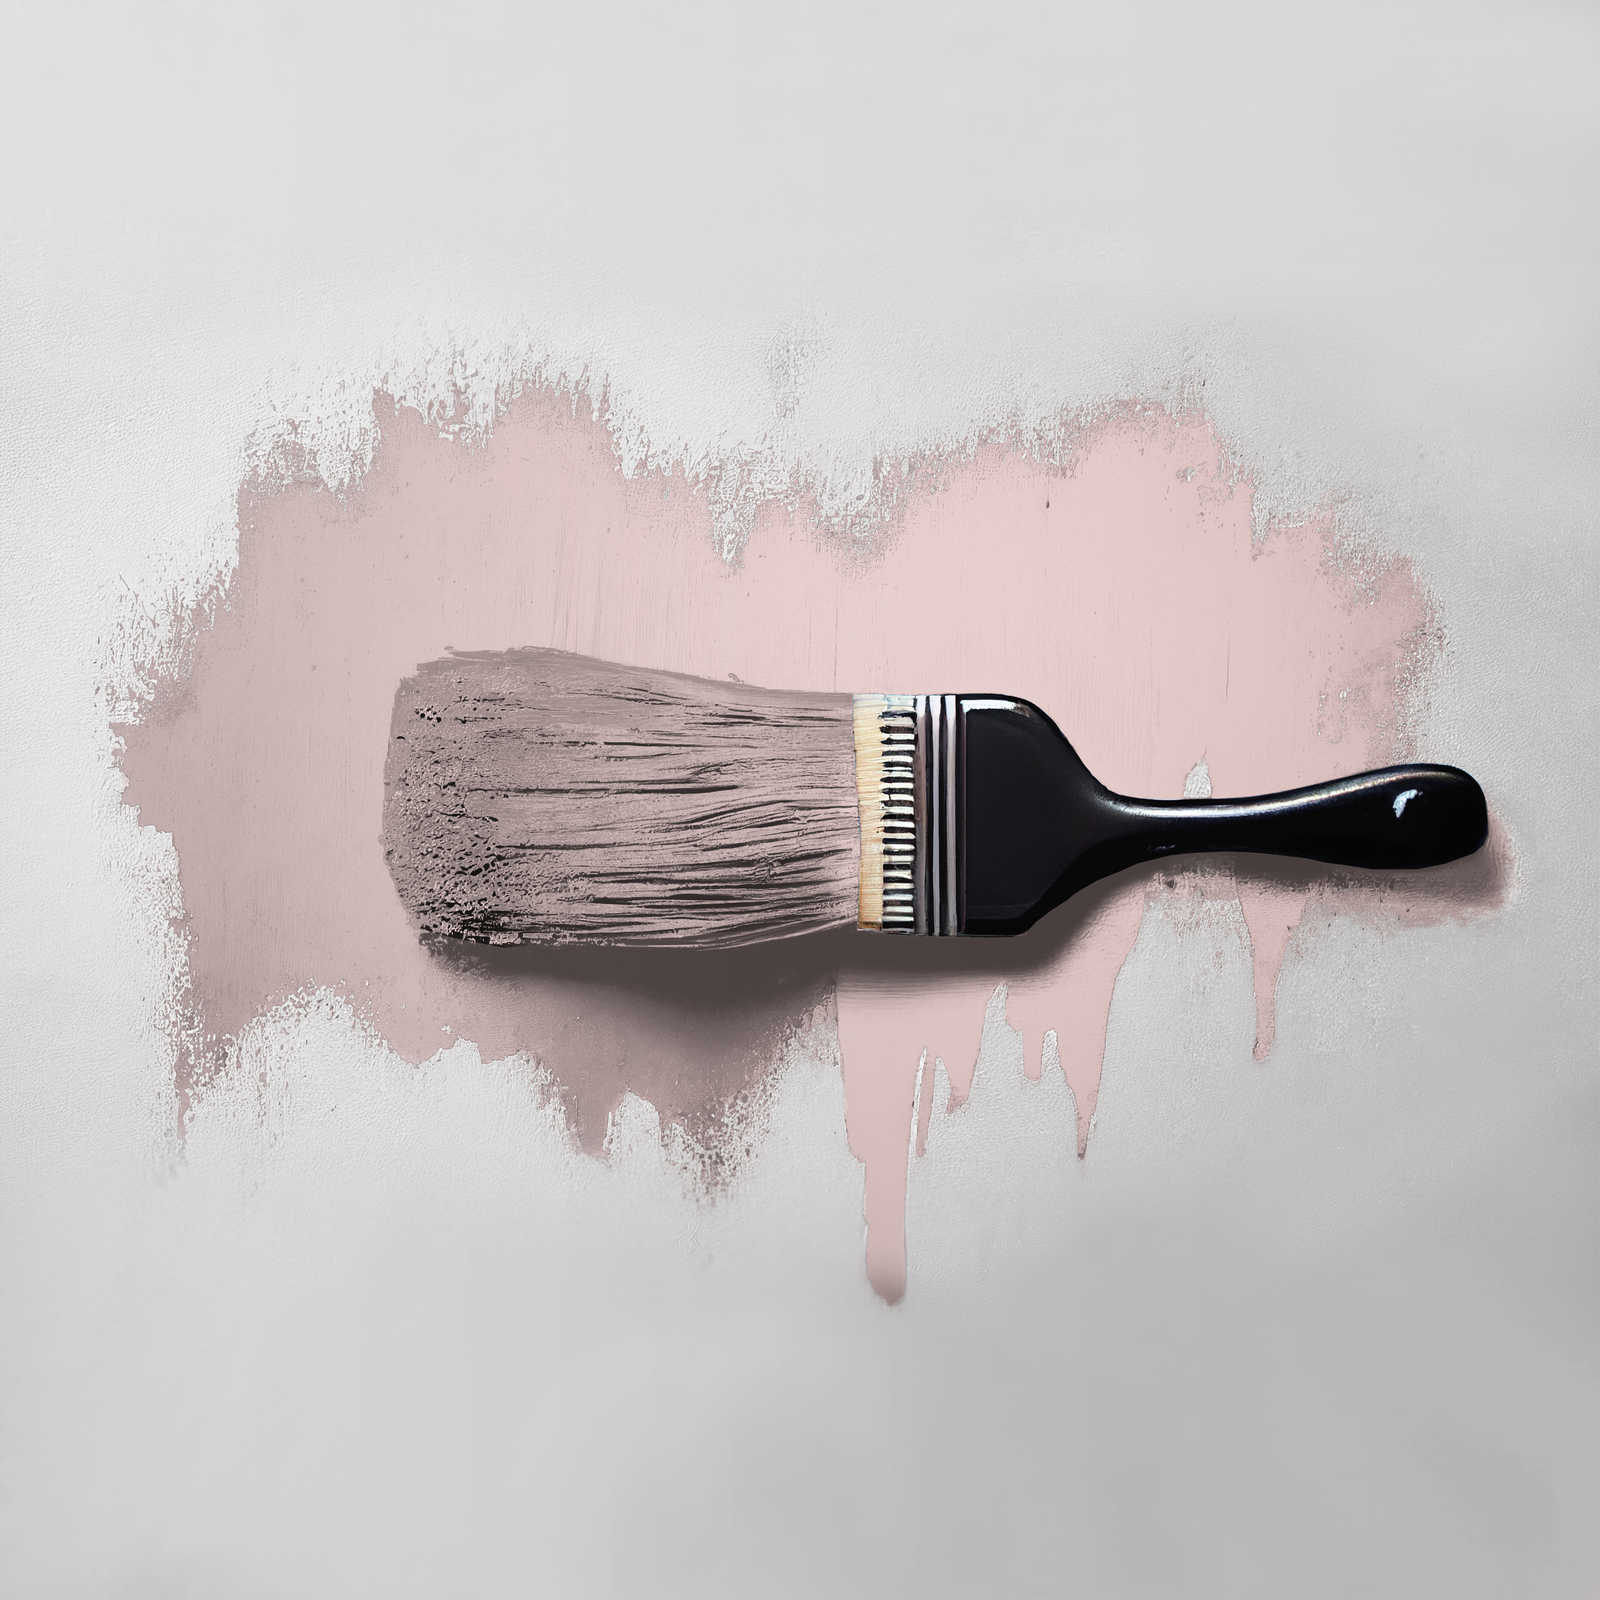             Wall Paint TCK7008 »Cute Cupcake« in delicate pink – 5.0 litre
        